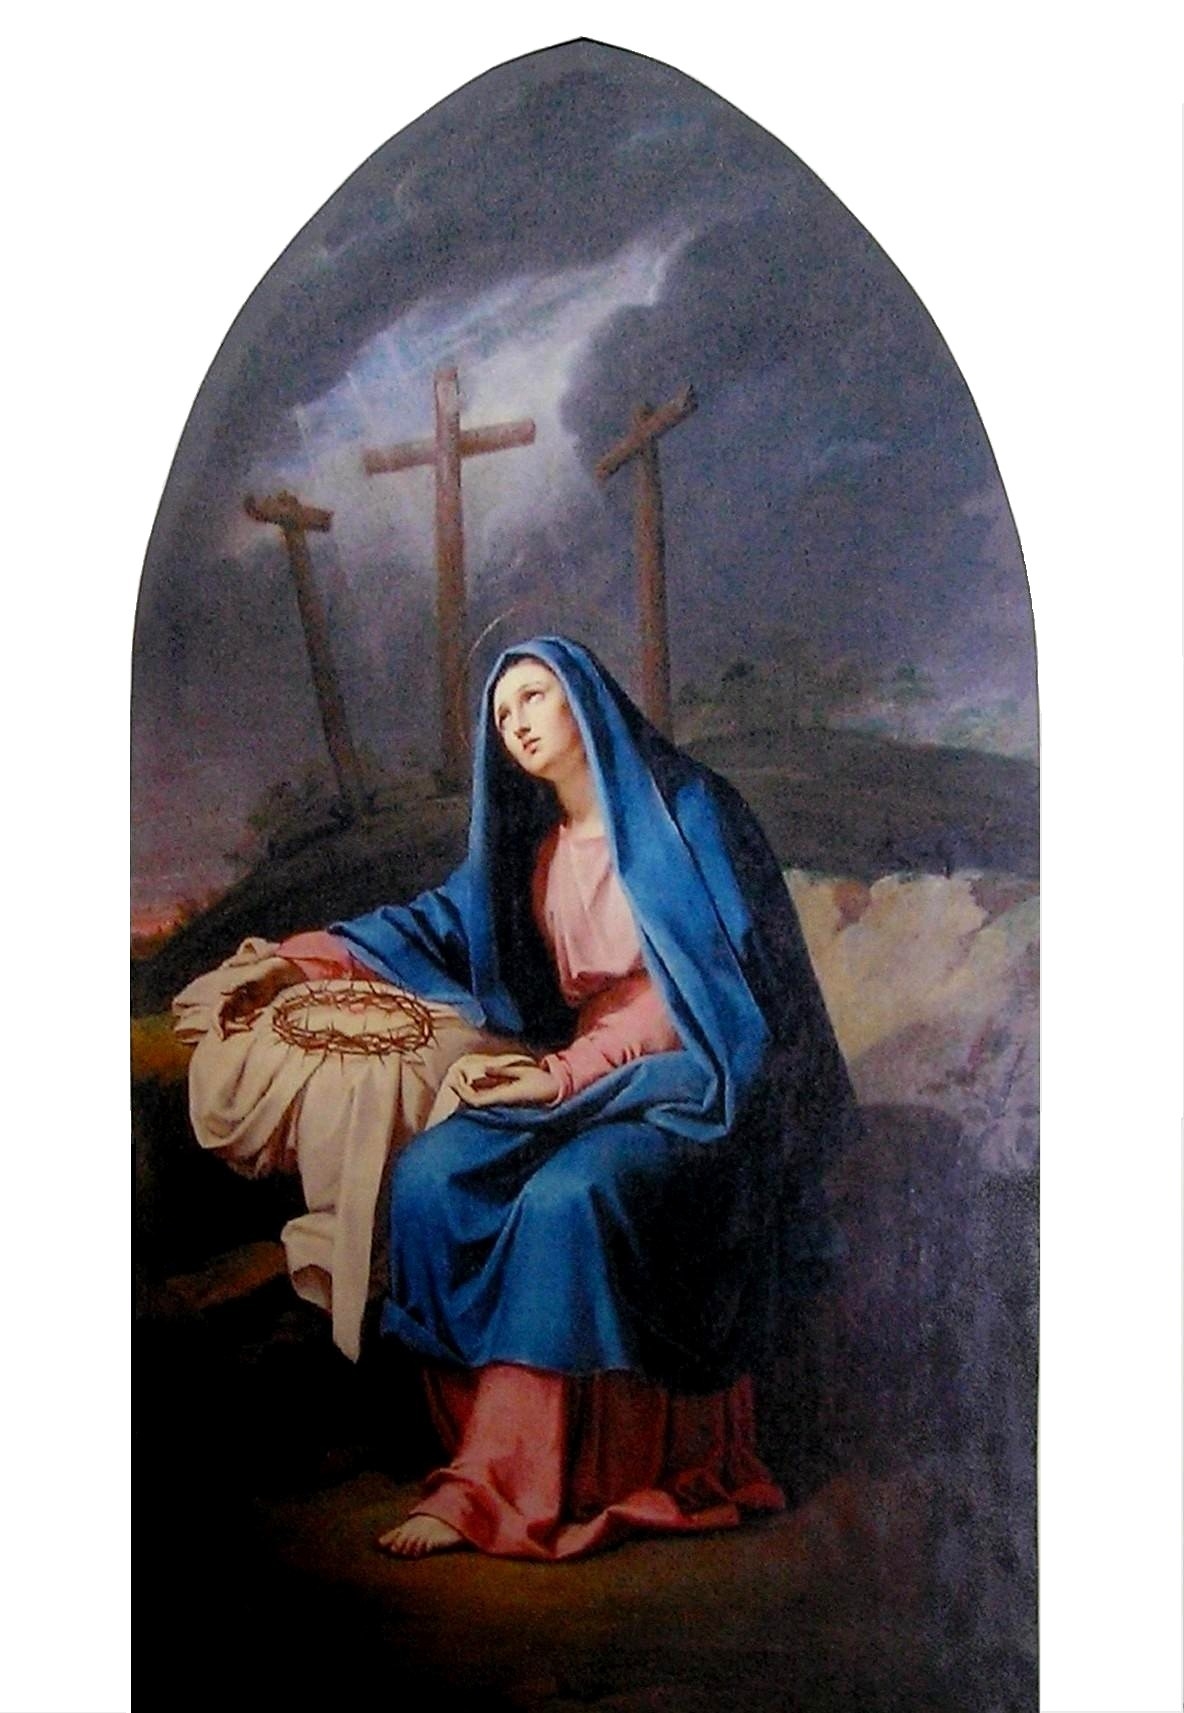 Our Lady of Sorrows in the Society